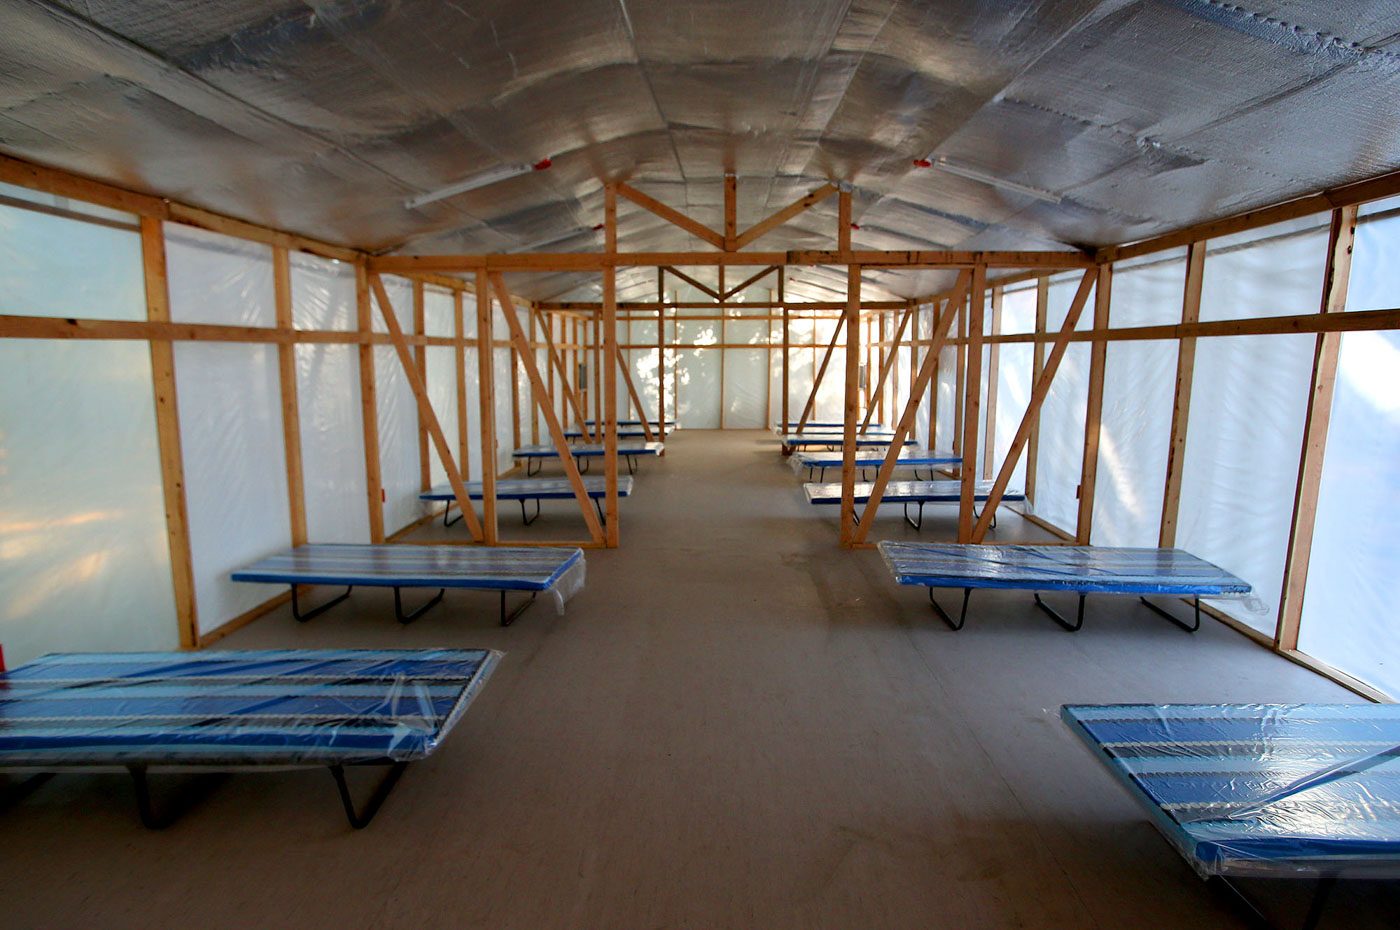 17 BEDS. The facility was designed and donated by the company WTA Architecture and Design. Photo by Inoue Jaena/Rappler 